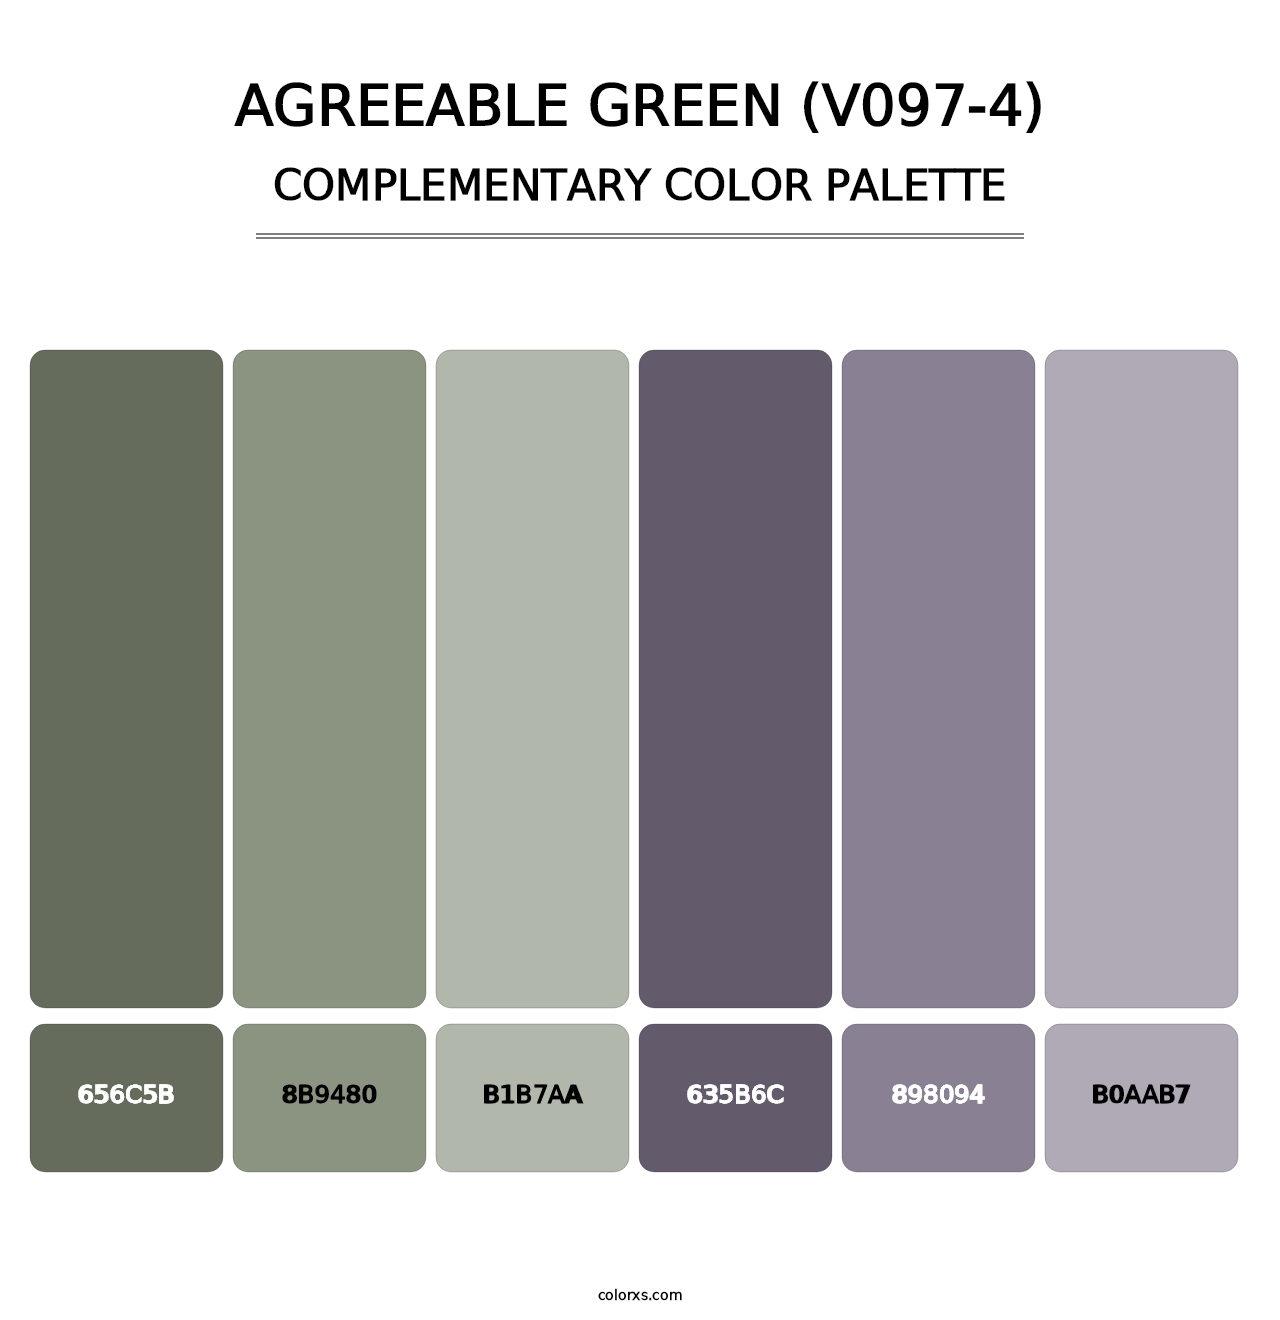 Agreeable Green (V097-4) - Complementary Color Palette